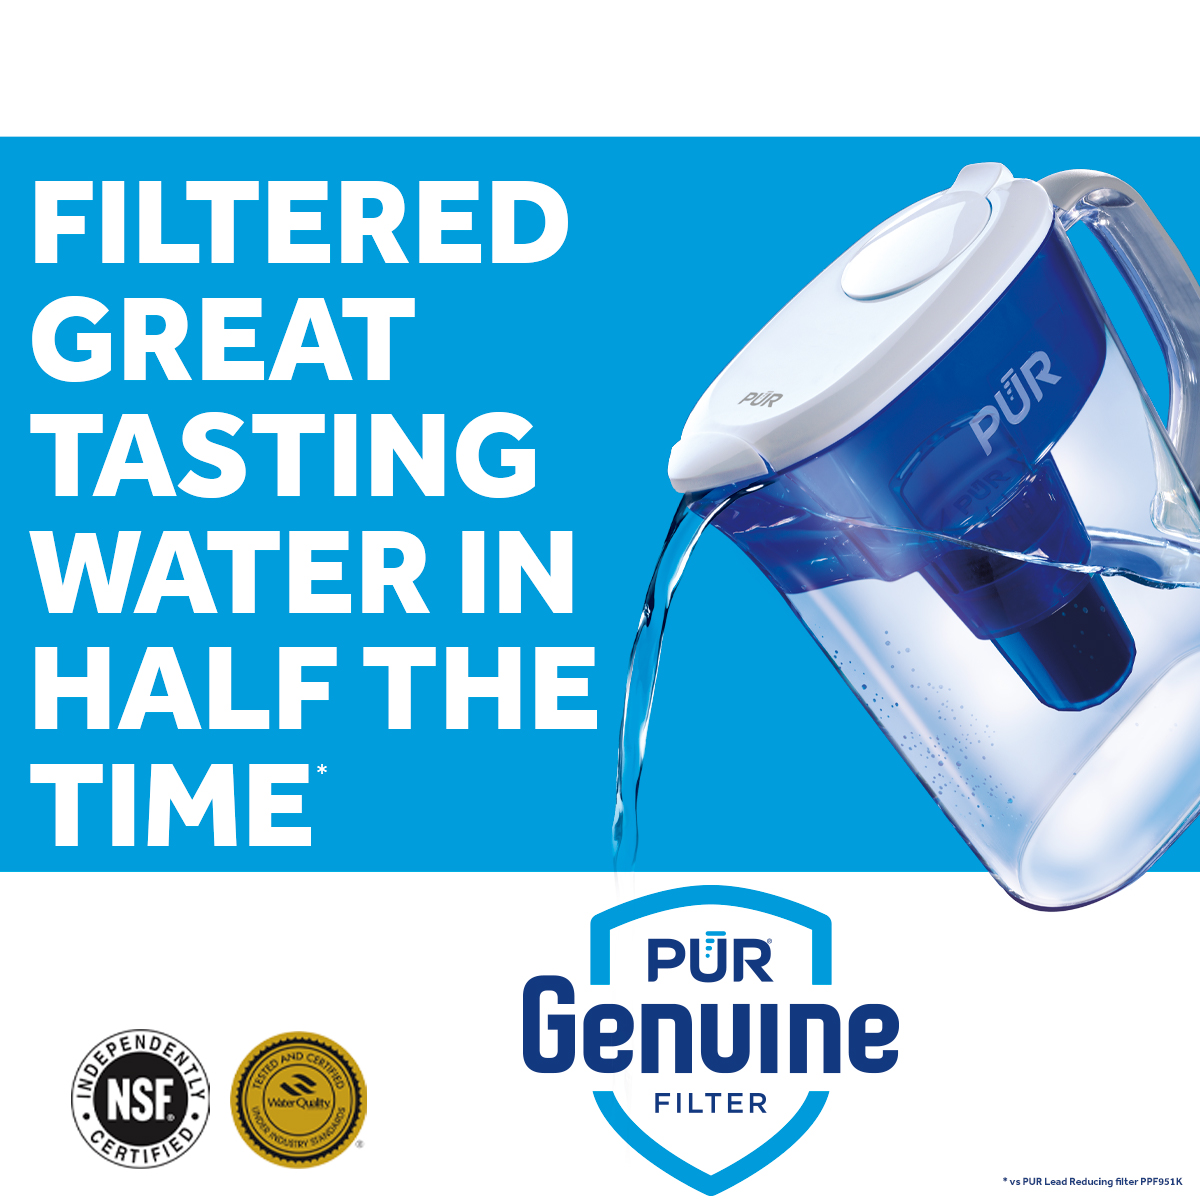 PUR 7 Cup Pitcher Filtration System, PPT700W, Blue/White - image 5 of 13